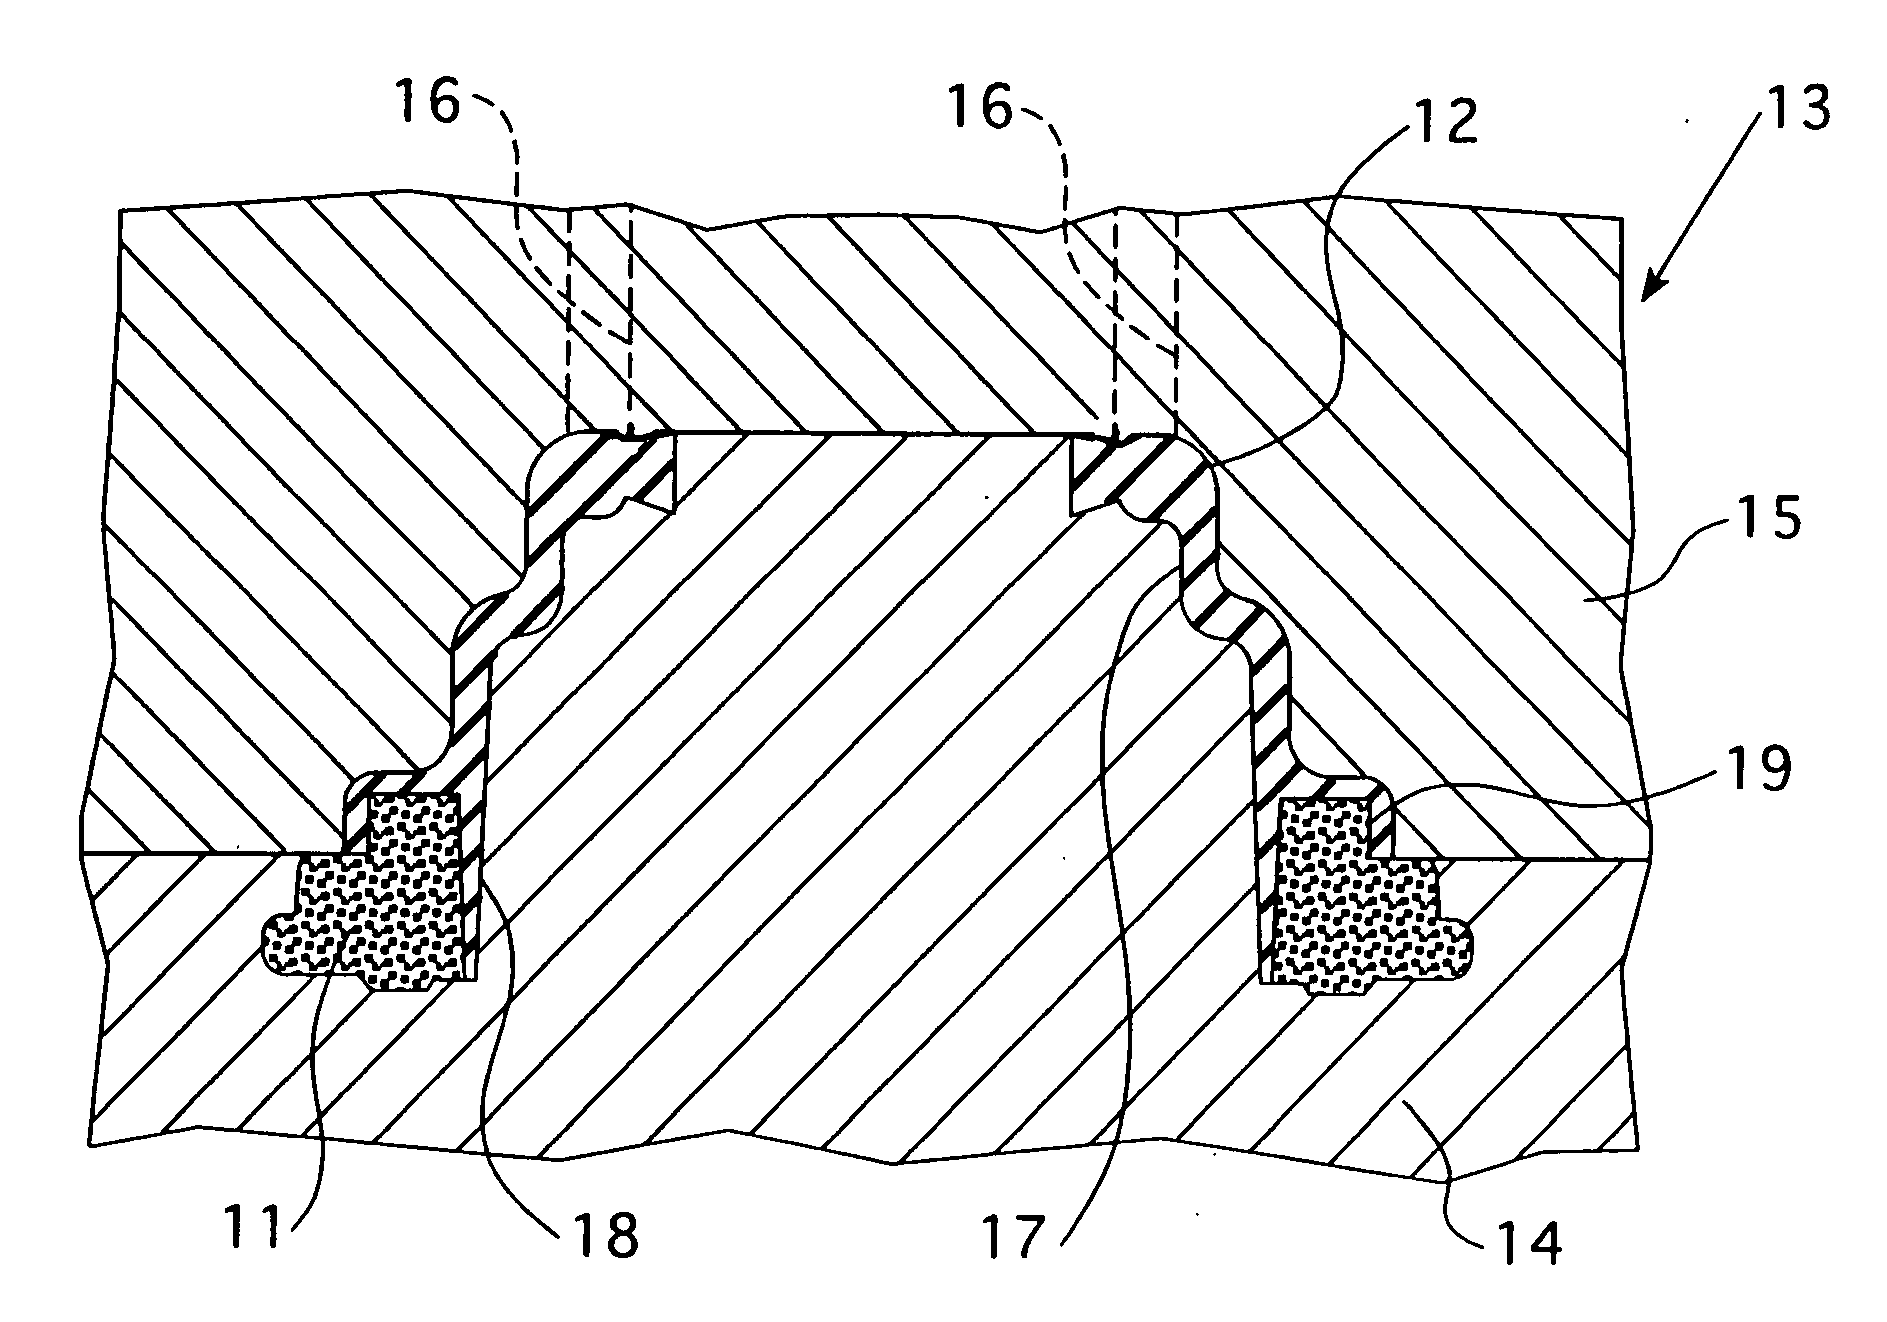 Rotary centrifuge seal with a phenolic overmold component and method of manufacture